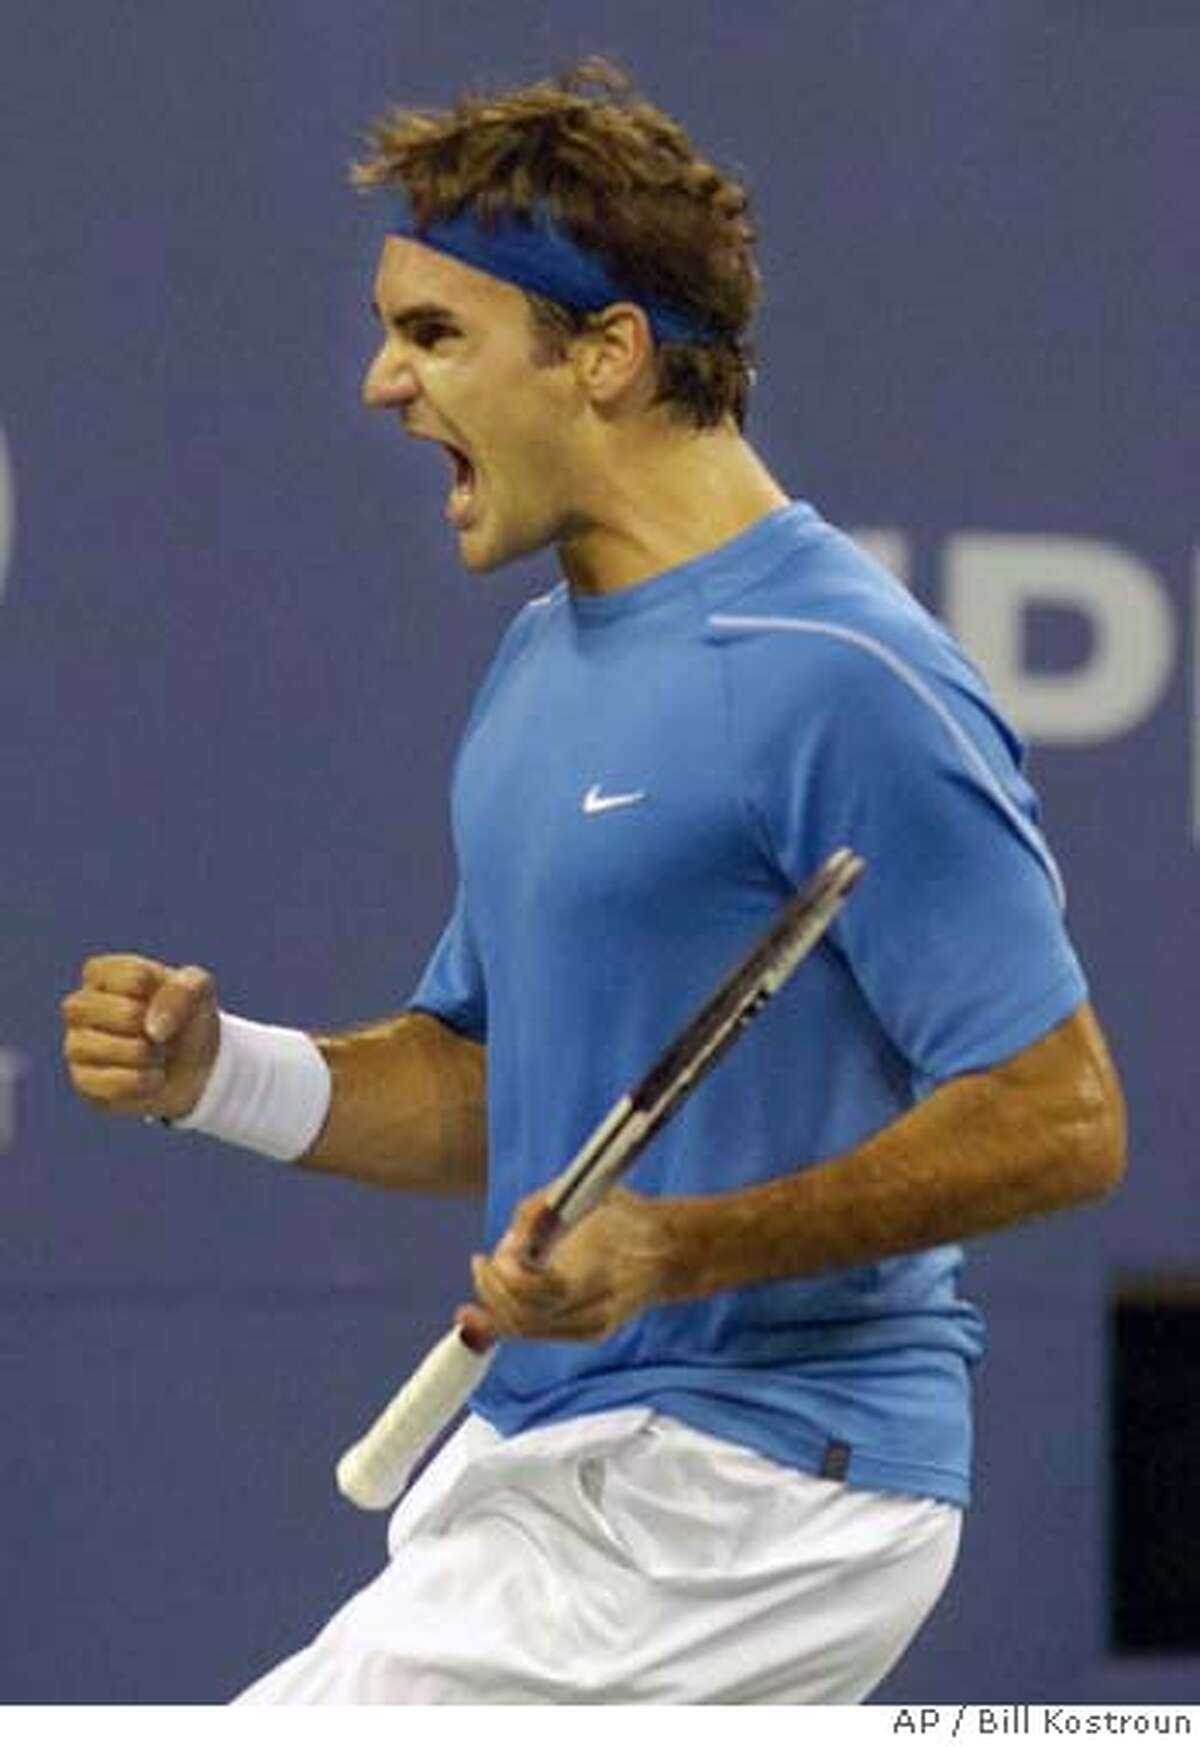 Roger Federer, of Switzerland, reacts after winning the first set against James Blake, of the United States, at the US Open tennis tournament in New York, Thursday, Sept. 7, 2006. (AP Photo/Bill Kostroun)